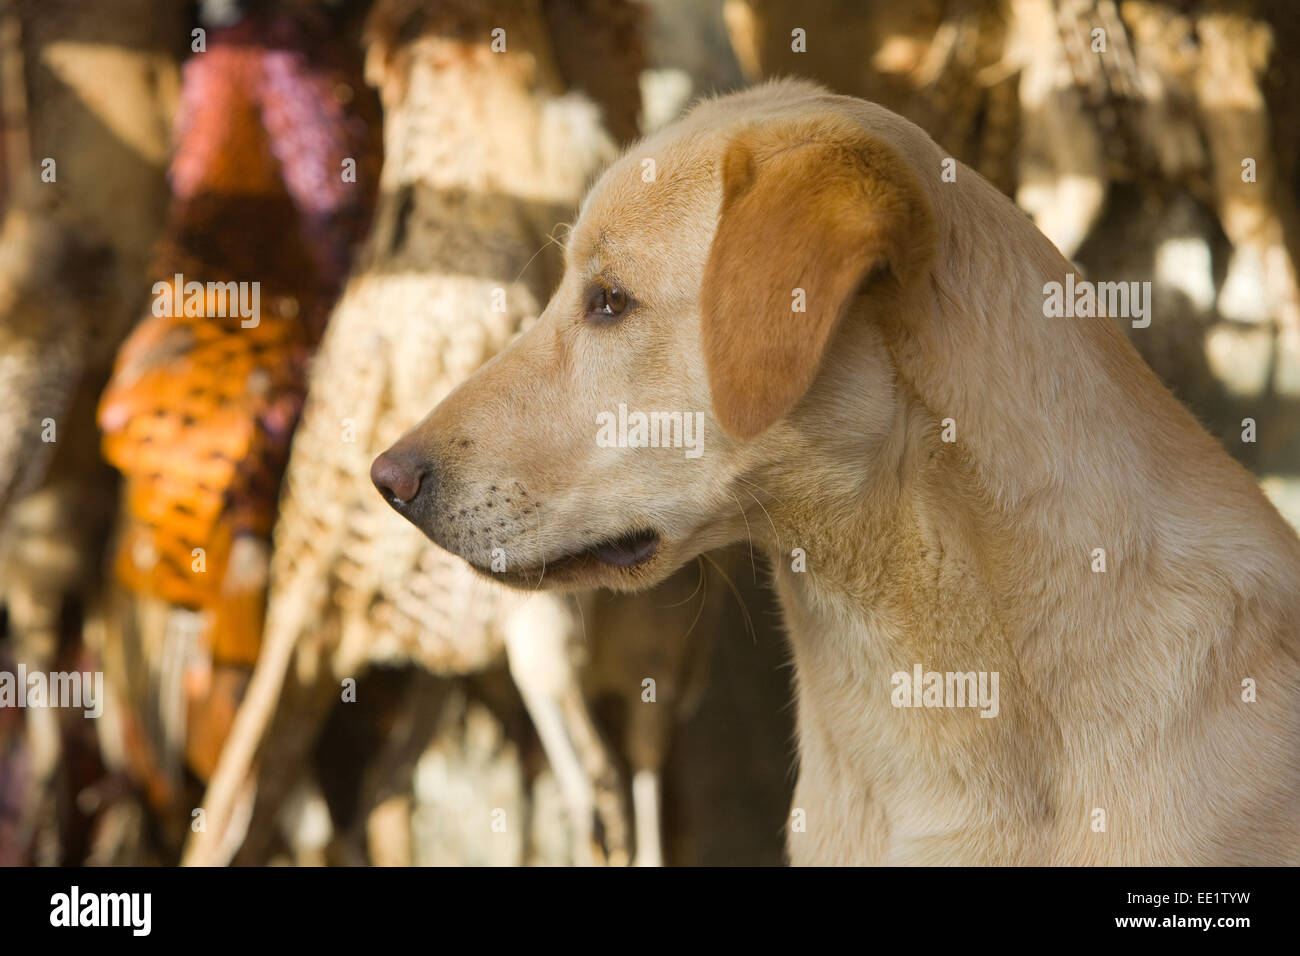 A Labrador Retriever working dog sat with pheasants hanging in the background on a shoot in England, UK Stock Photo